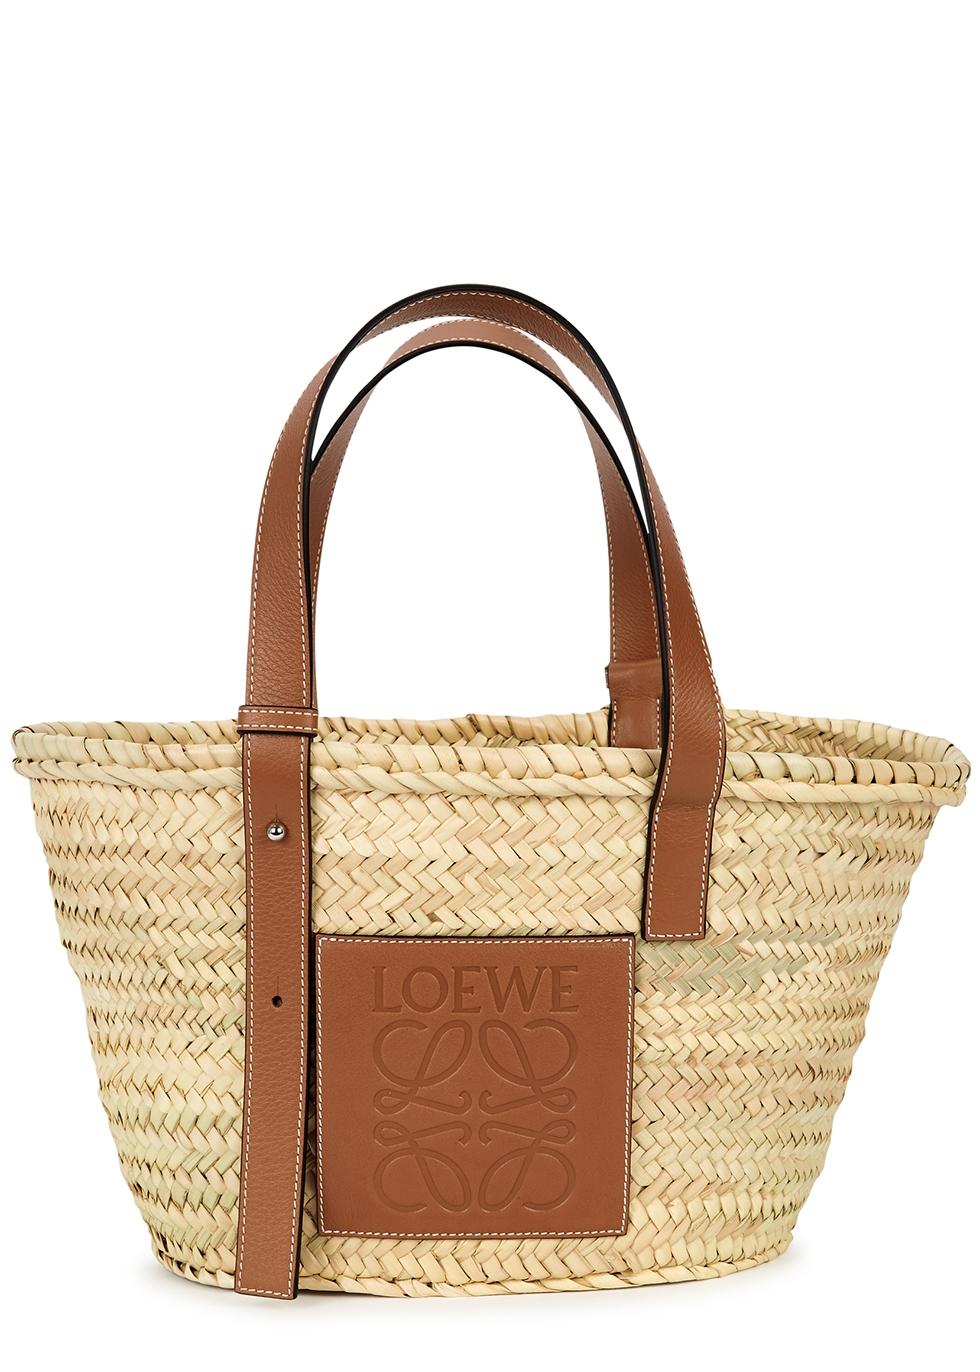 WIN a @LOEWE raffia tote bag to match all of your summer outfits 🌞 We